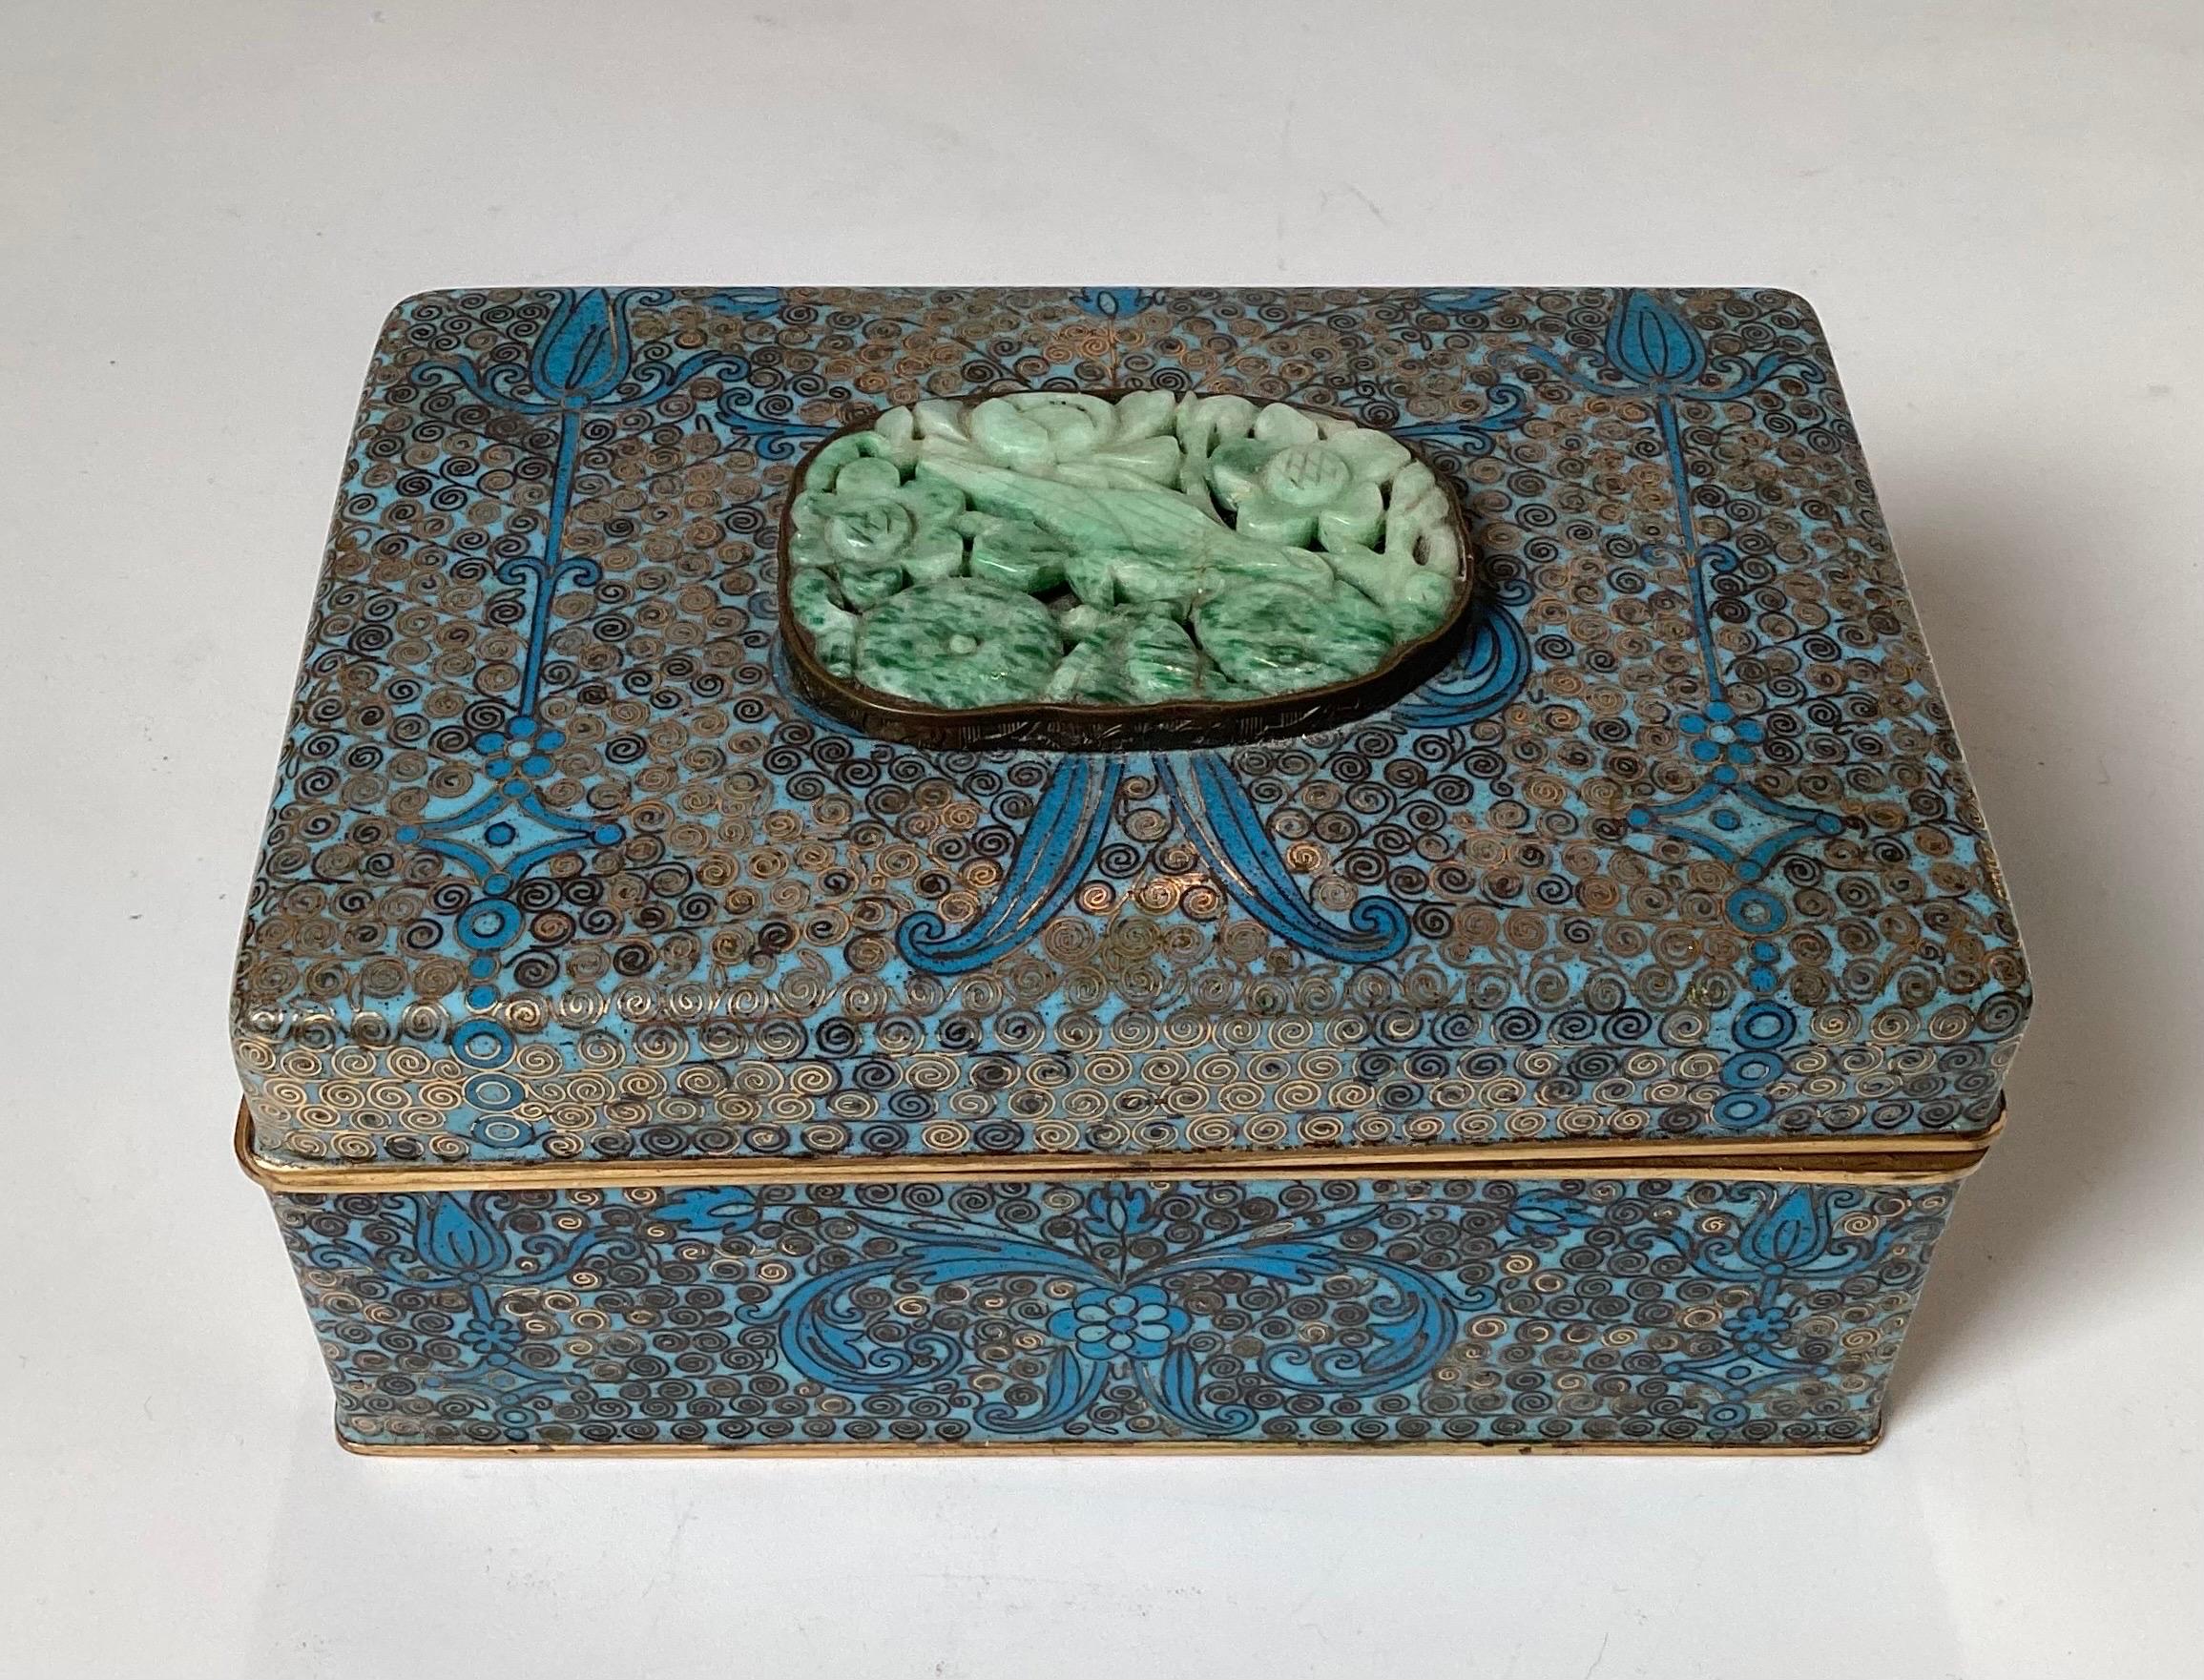 A diminutive Antique Chinese Cloisonné box with jade medallion line with wood. The enameled outside in shades of blue with gold color wiring with gilt at the edges, the interior is lined with a dark wood. 5 inches long, 3.5 inches deep, 2.5 inches